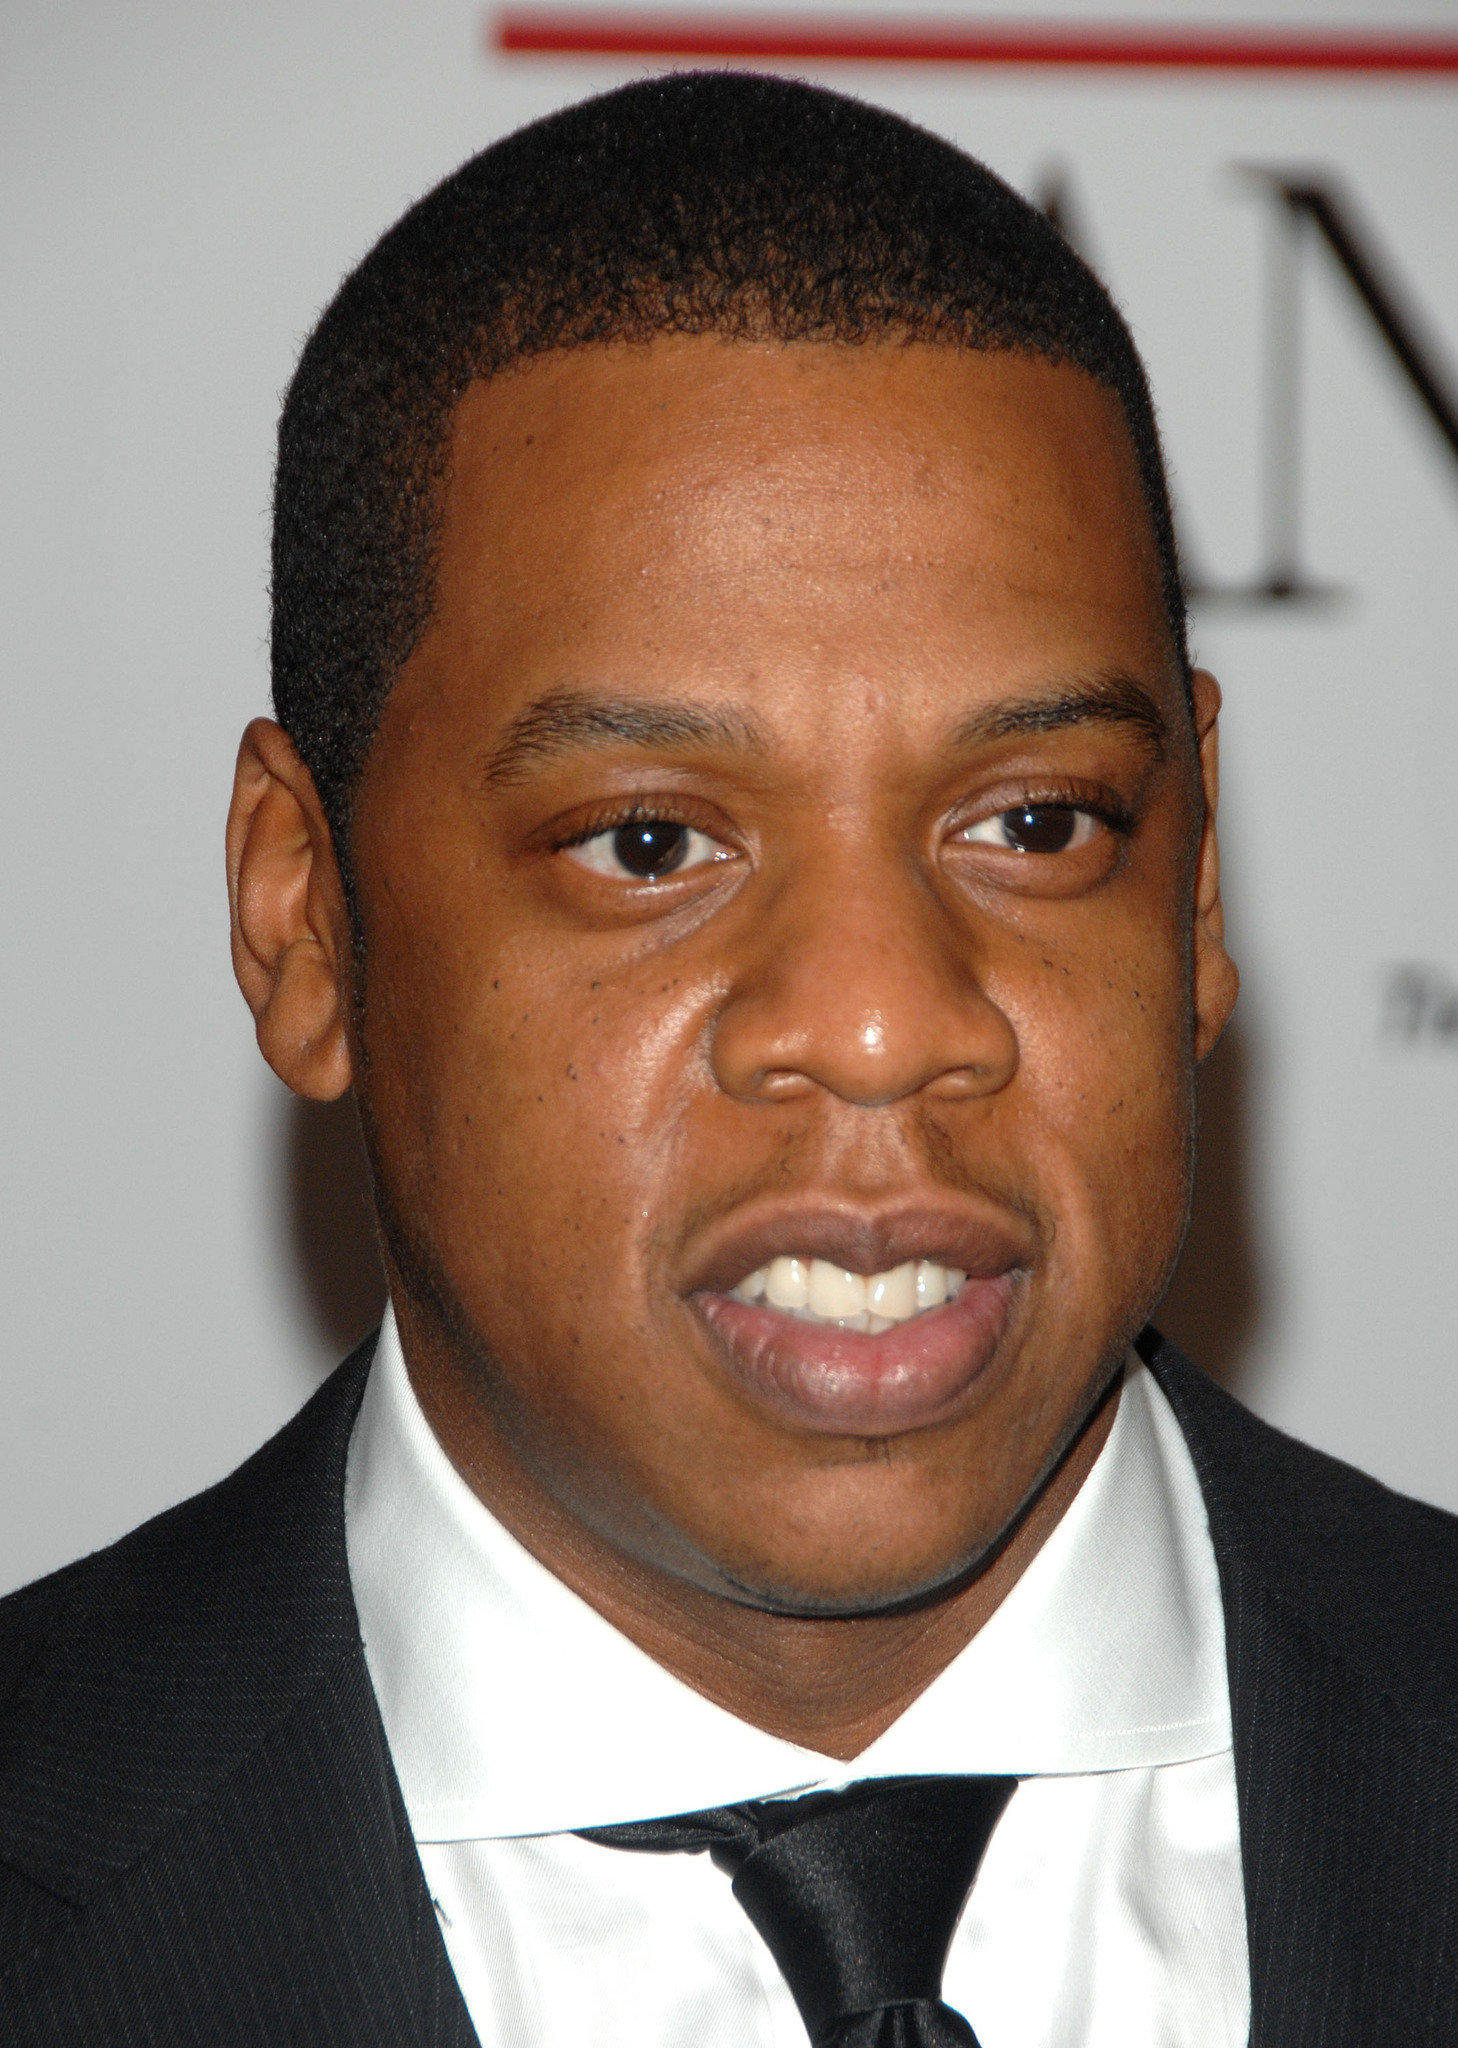 Jay-Z, Shot his brother over a dispute about jewelry